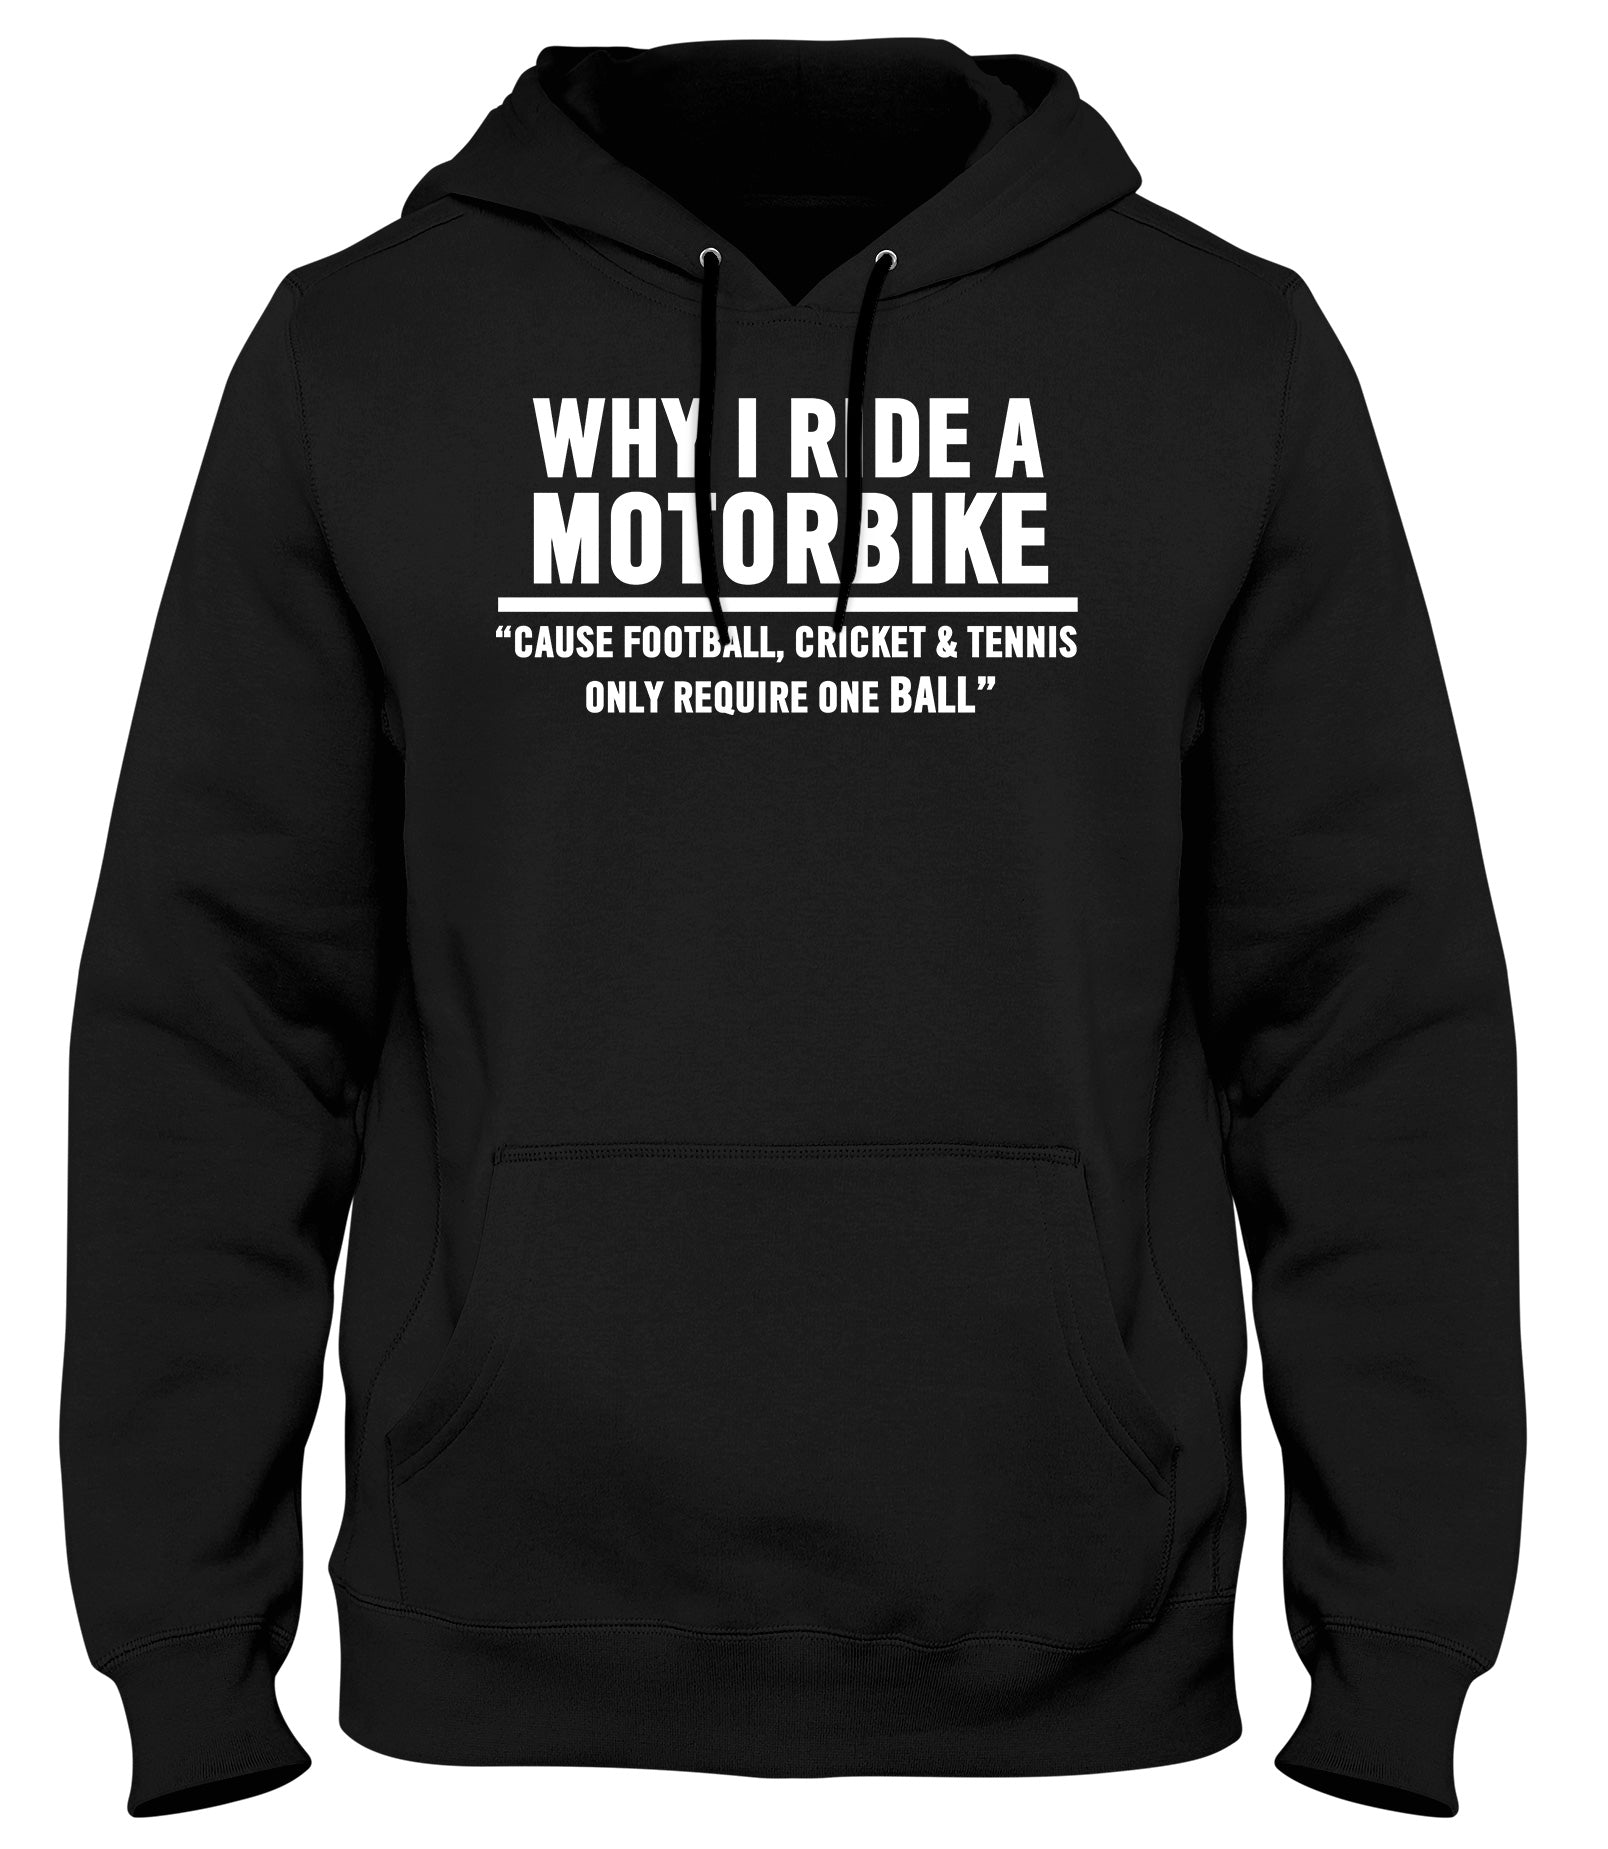 WHY I RIDE A MOTORBIKE  CAUSE FOOTBALL  CRICKET AND TENNIS ONLY REQUIRE ONE BALL MENS WOMENS LADIES UNISEX FUNNY SLOGAN HOODIE